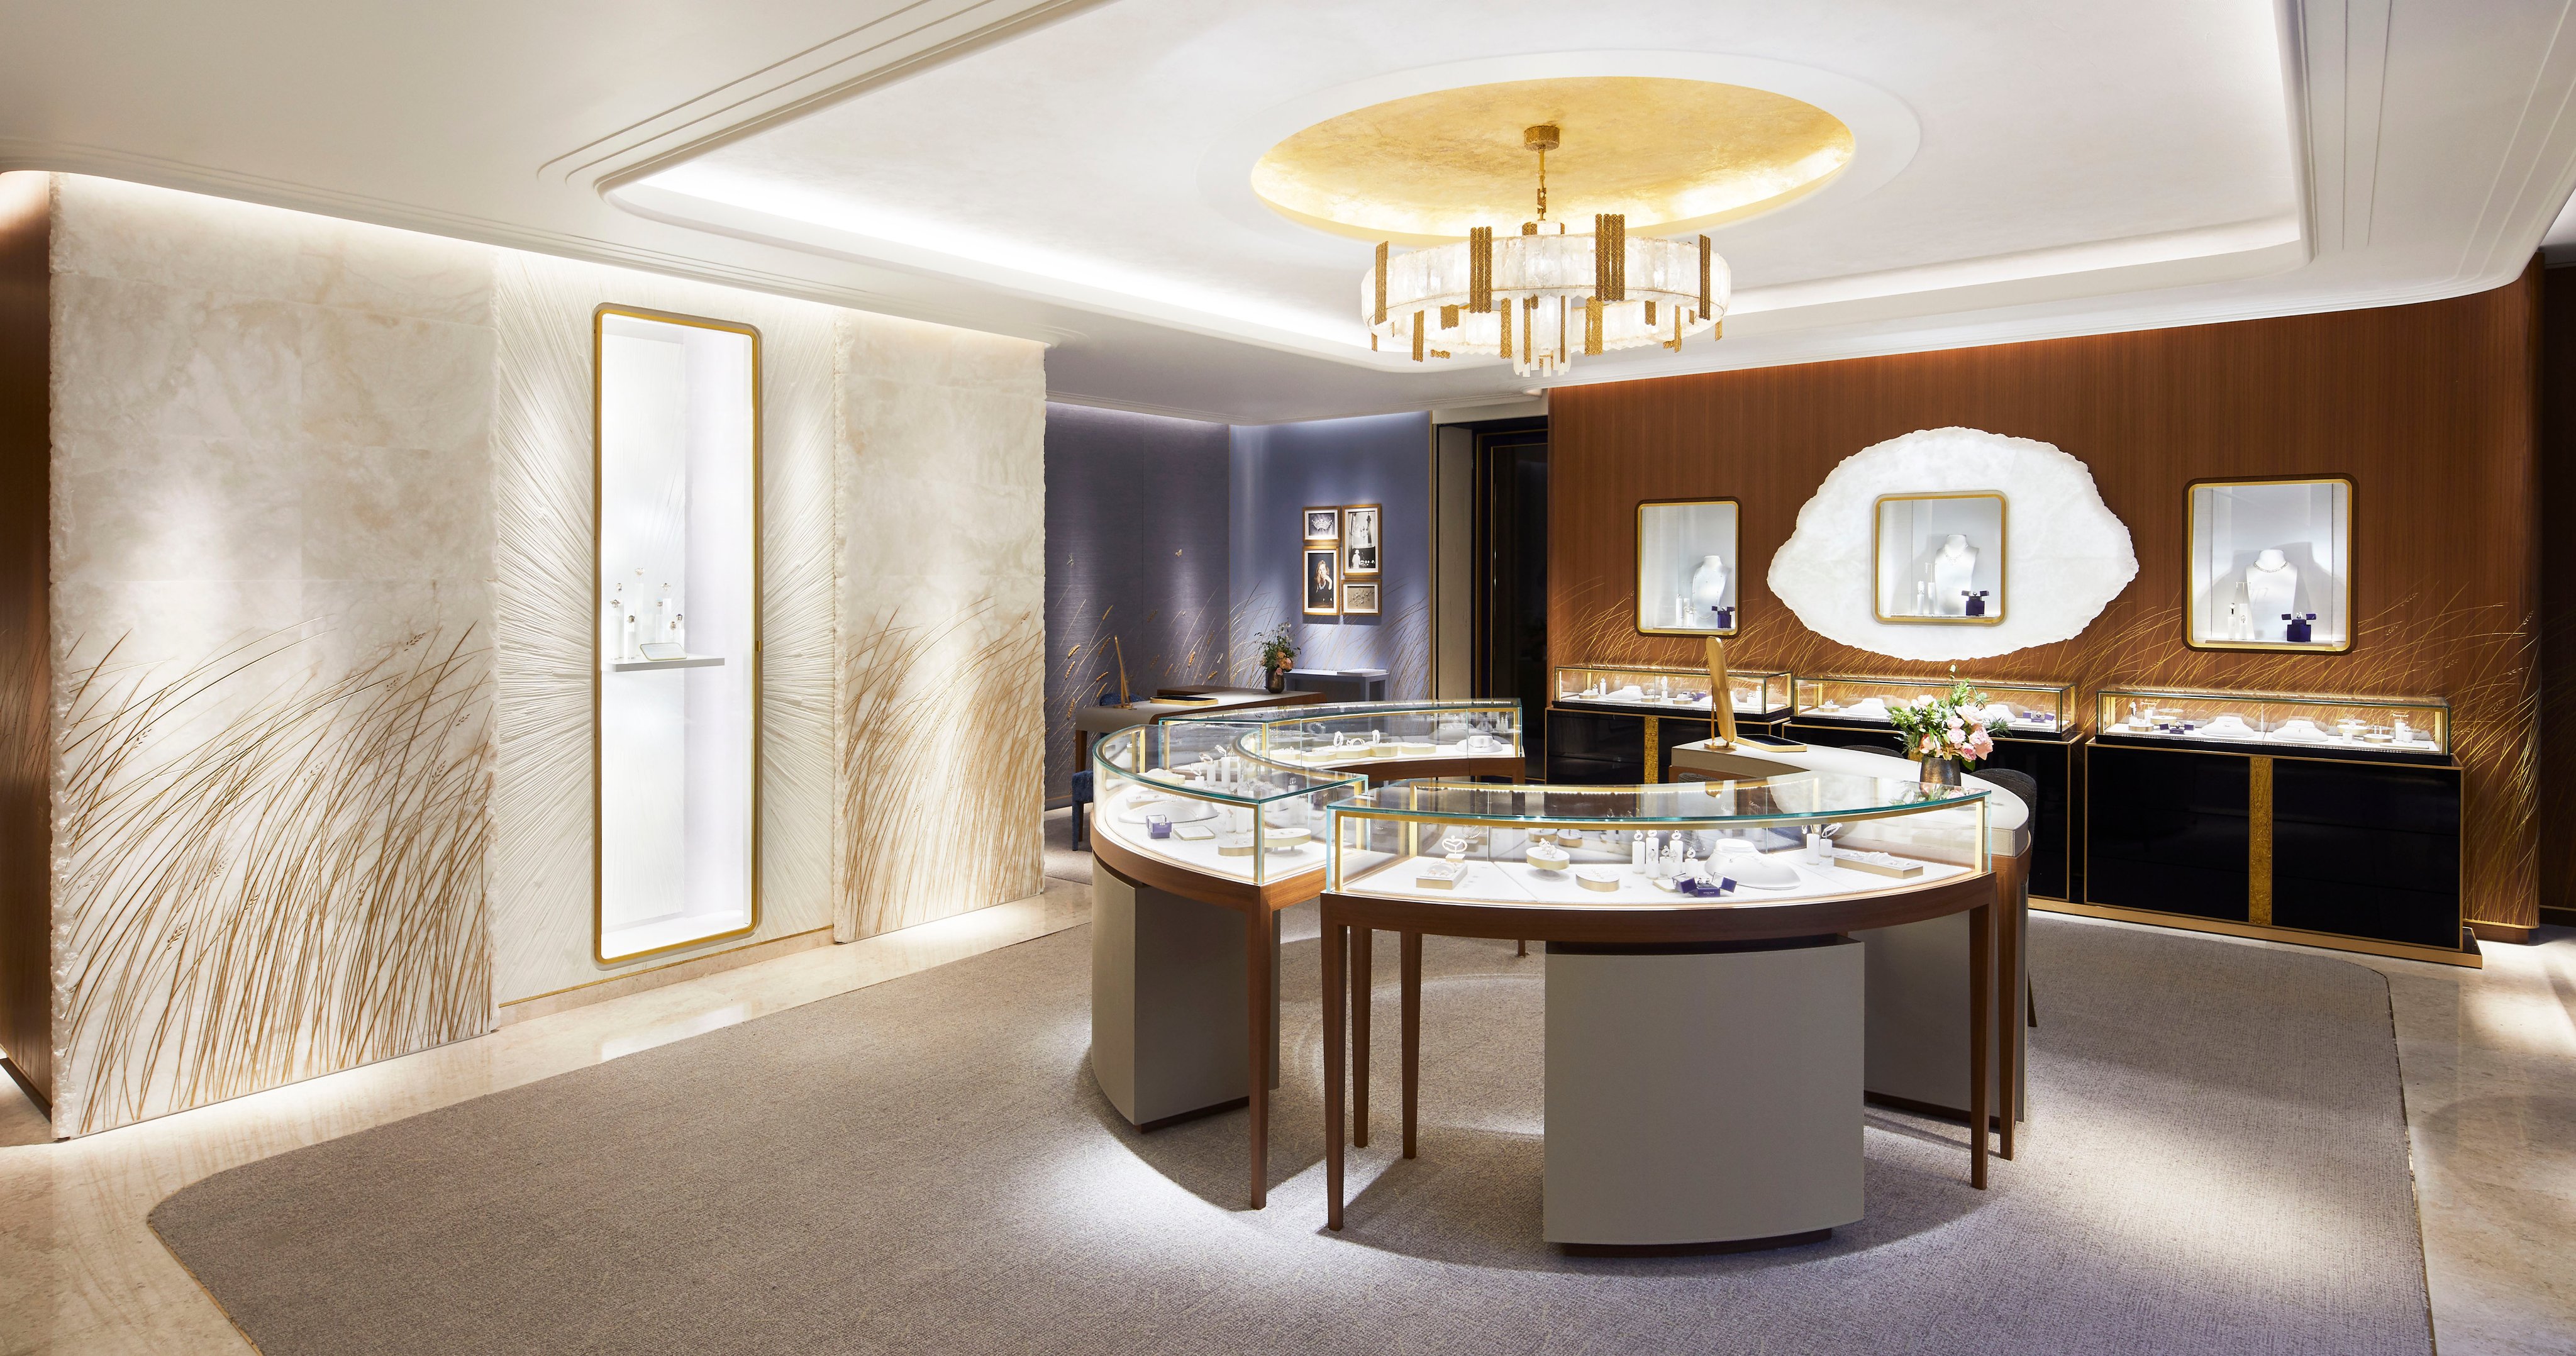 LVMH on X: Recently restored, @Chaumet's hôtel particulier at #12Vendome,  embodies the Maison's threefold vocation at this unique place steeped in  history: receiving clients, preserving and promoting culture, and inspiring  creativity.